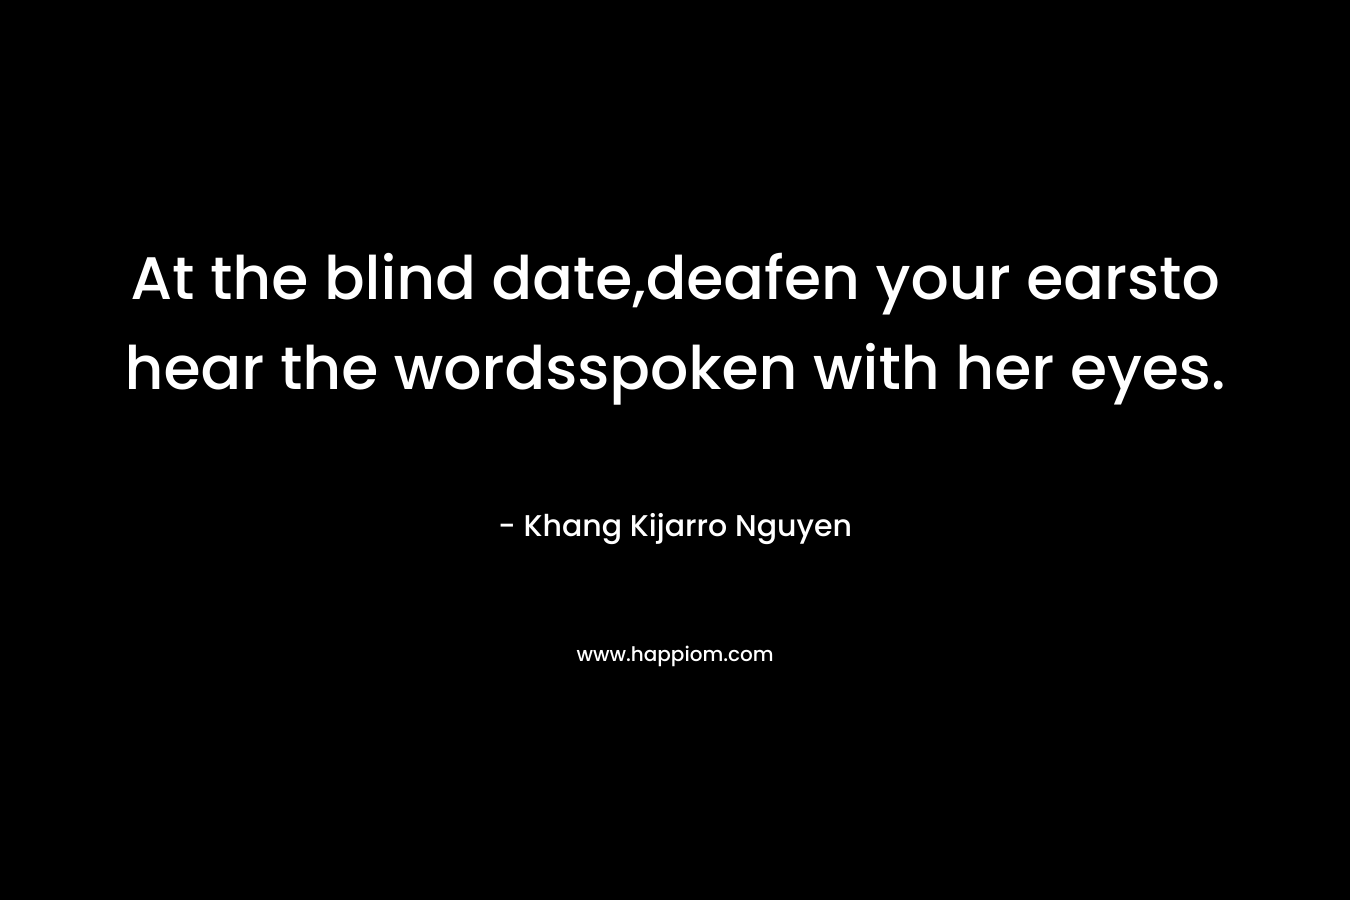 At the blind date,deafen your earsto hear the wordsspoken with her eyes. – Khang Kijarro Nguyen